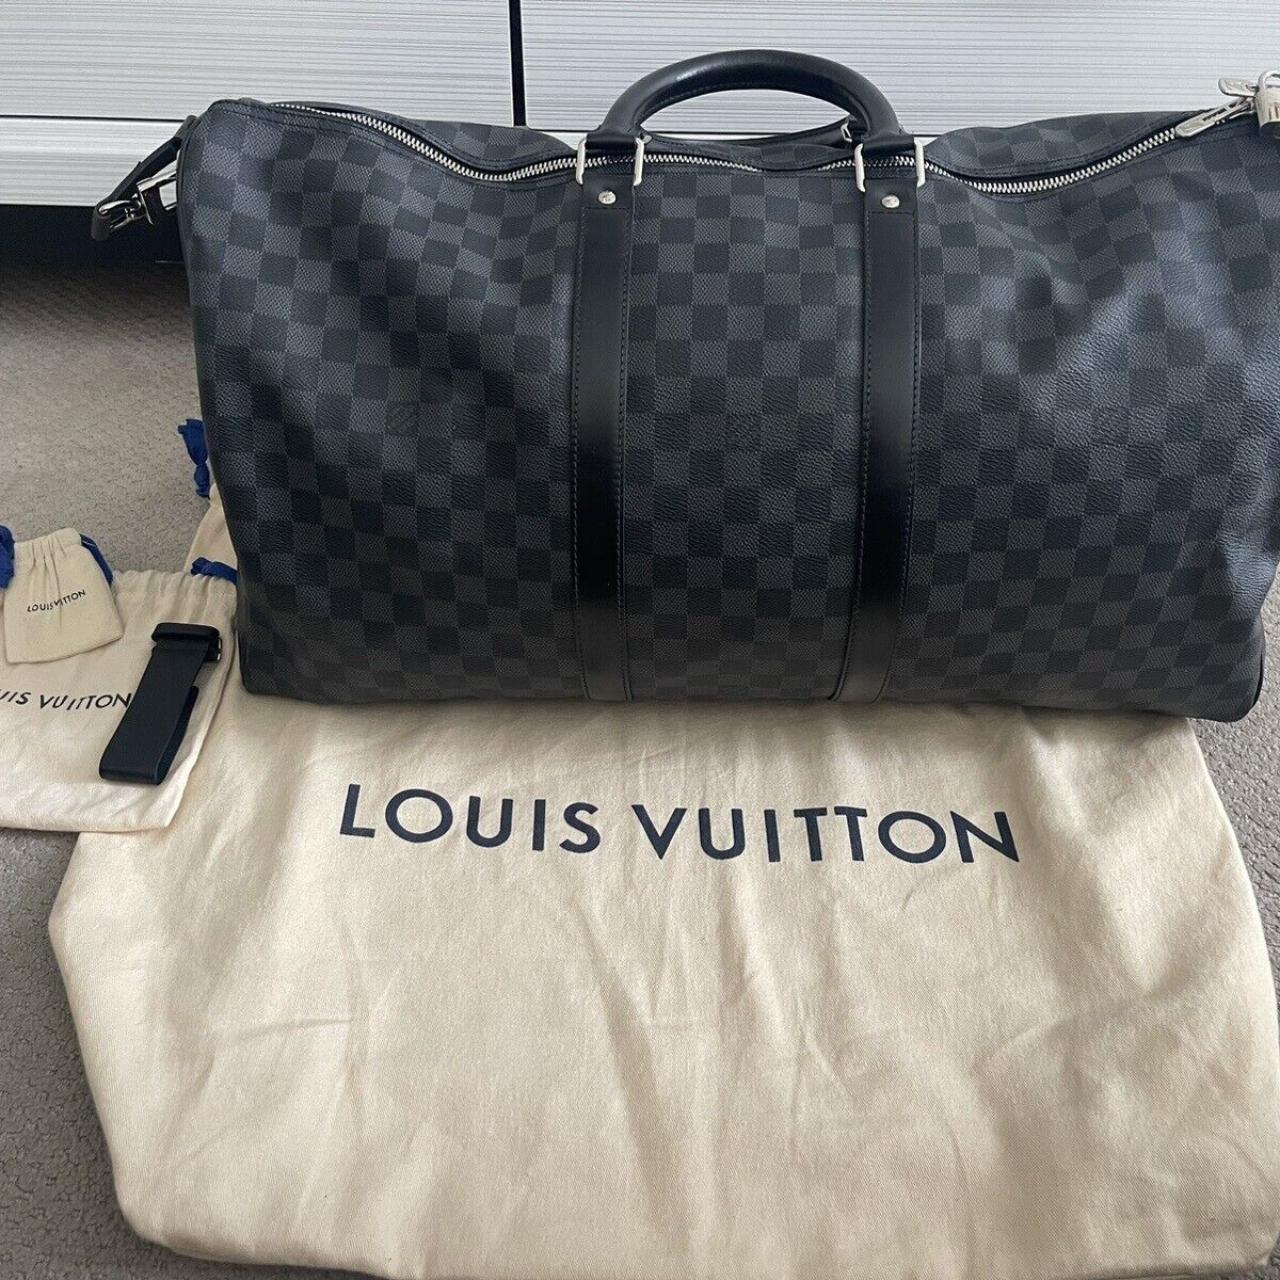 New Black Louis Vuitton Duffle Bag (WITH TAGS) Ask... - Depop